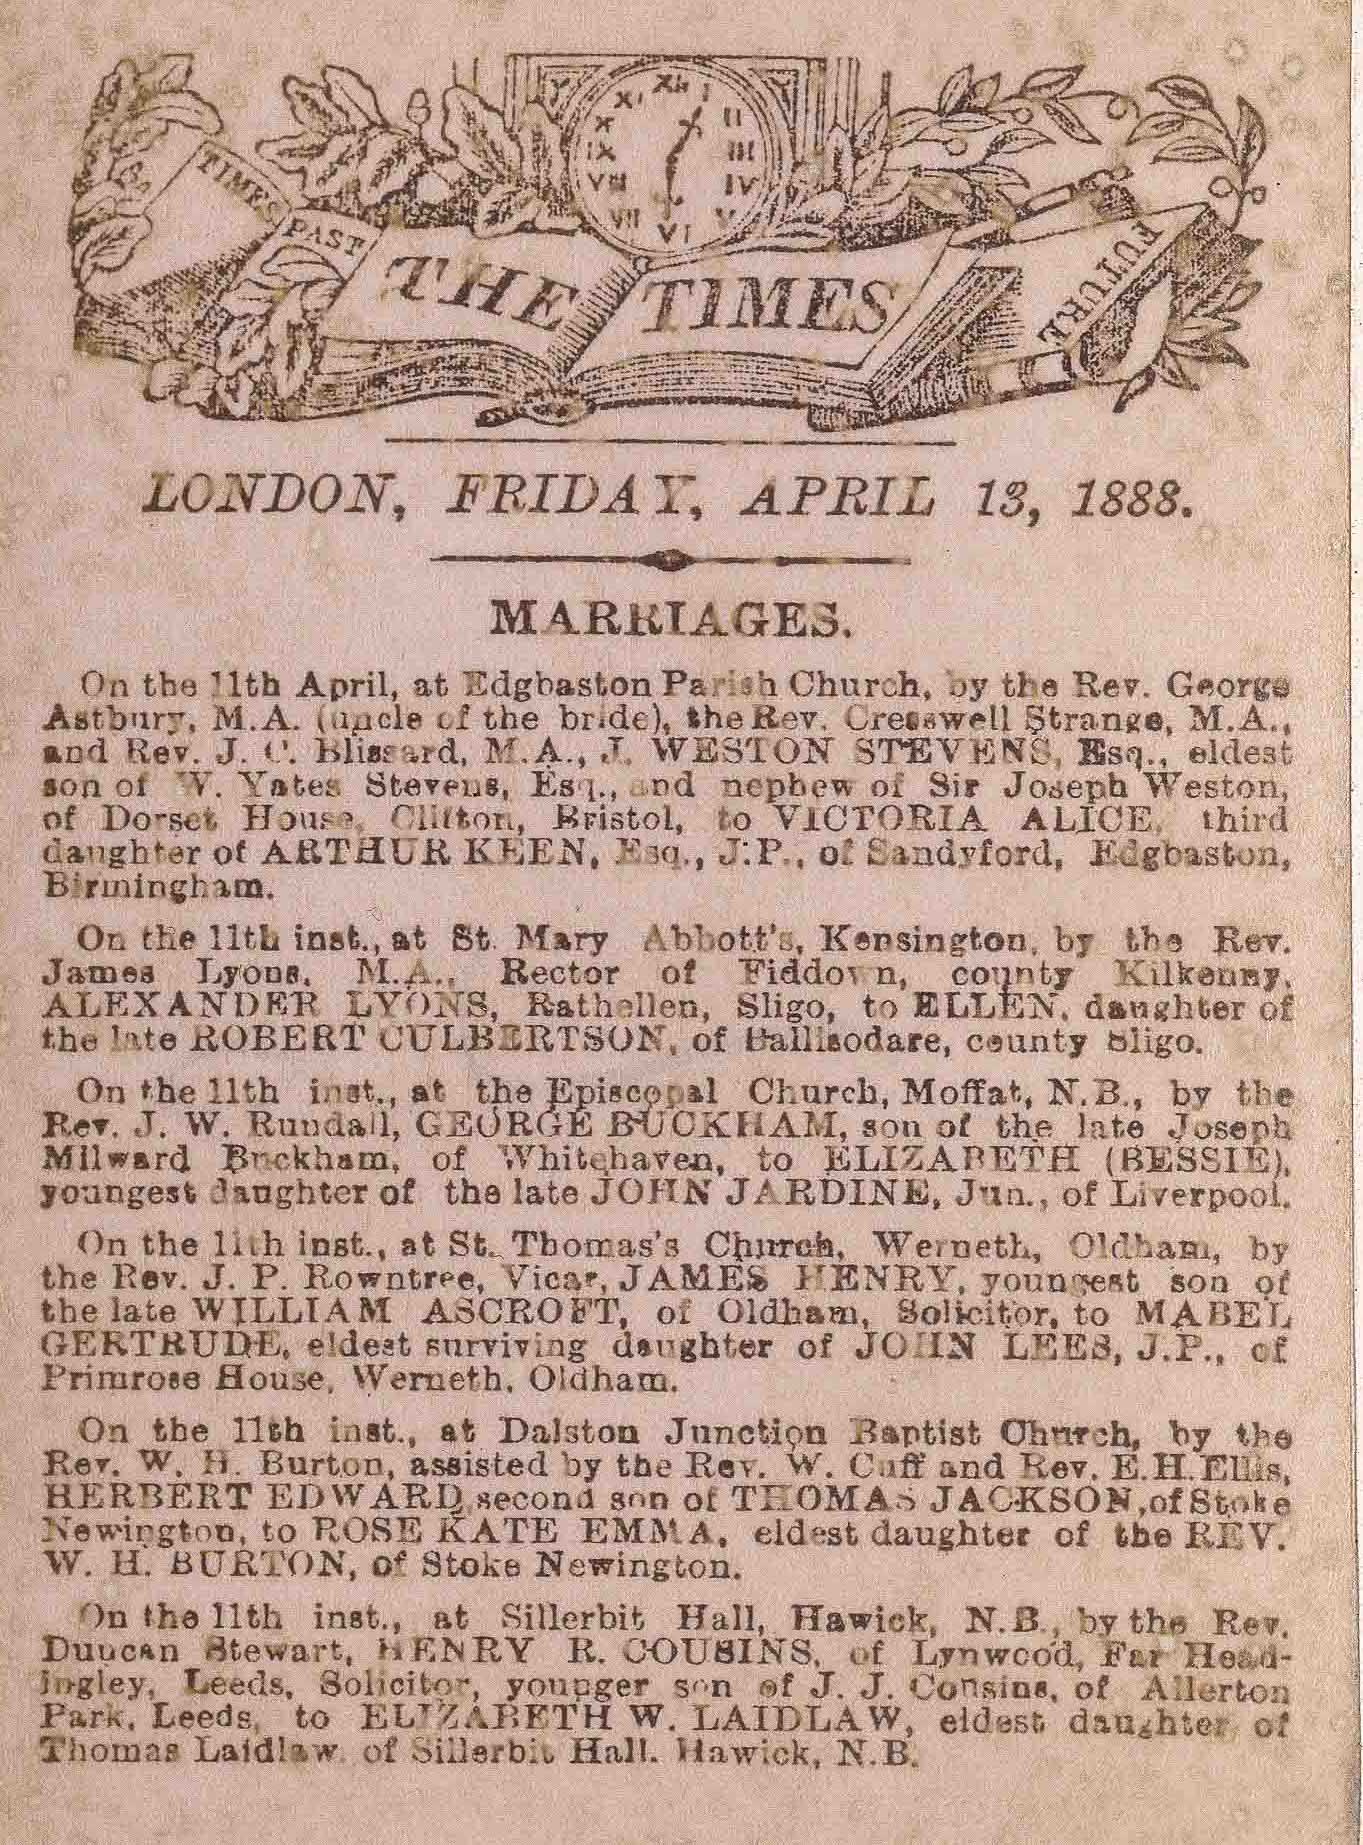  April 13 1888 Marriage announcement in The Times - Alexander Lyons to Ellen Culbertson - daughter of Robert Culbertson 